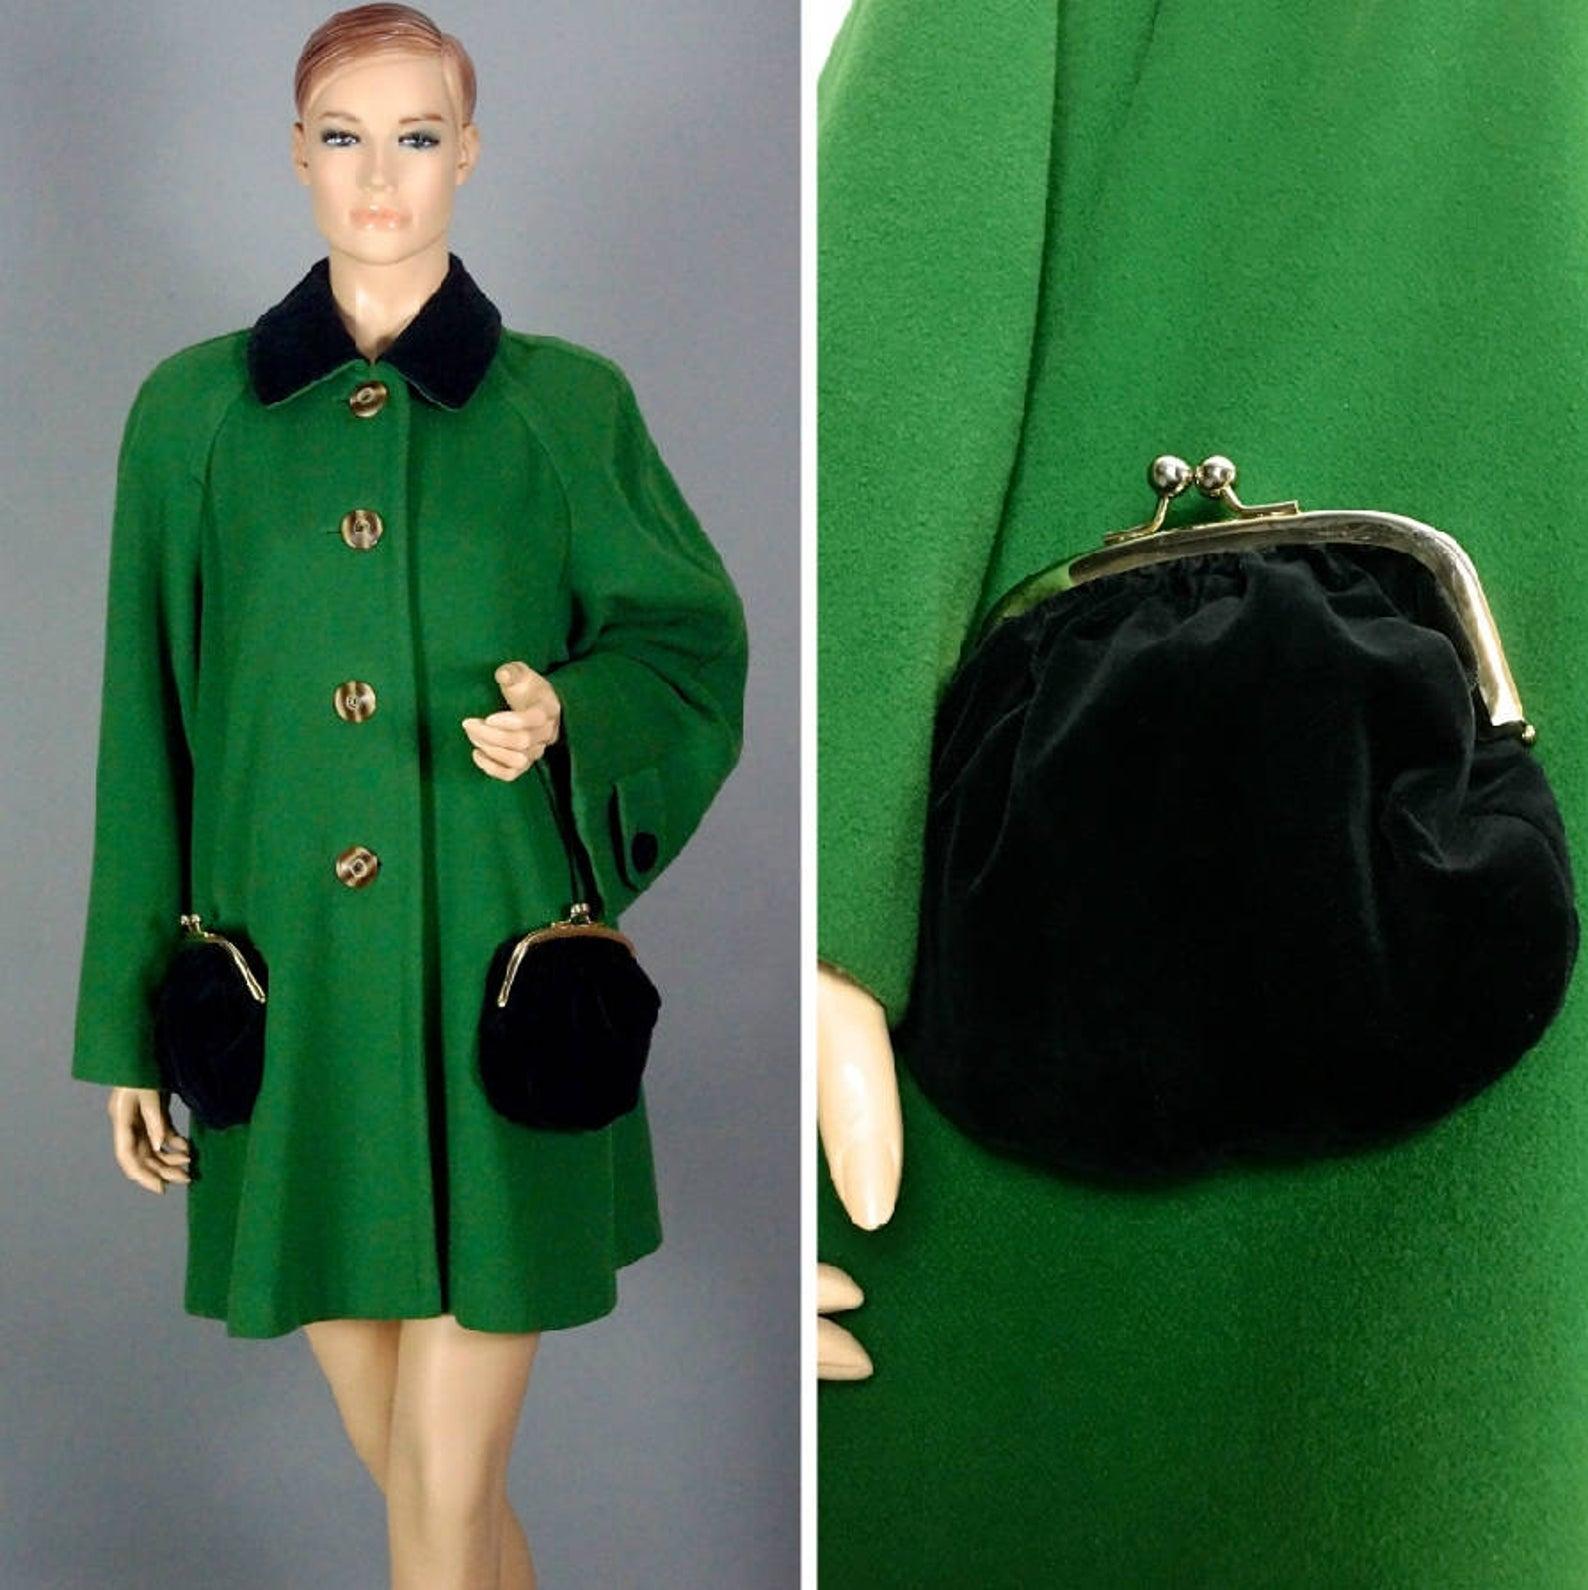 Vintage MOSCHINO Cheap and Chic Purse Kiss Lock Pocket Swing Coat

Measurements taken laid flat, please double bust and waist:
Length: 34.25 inches (86.99 cm)
Purse Pockets: 6.5 inches X 8 inches (16.51 cm X 20.32 cm)

Features:
- 100% Authentic